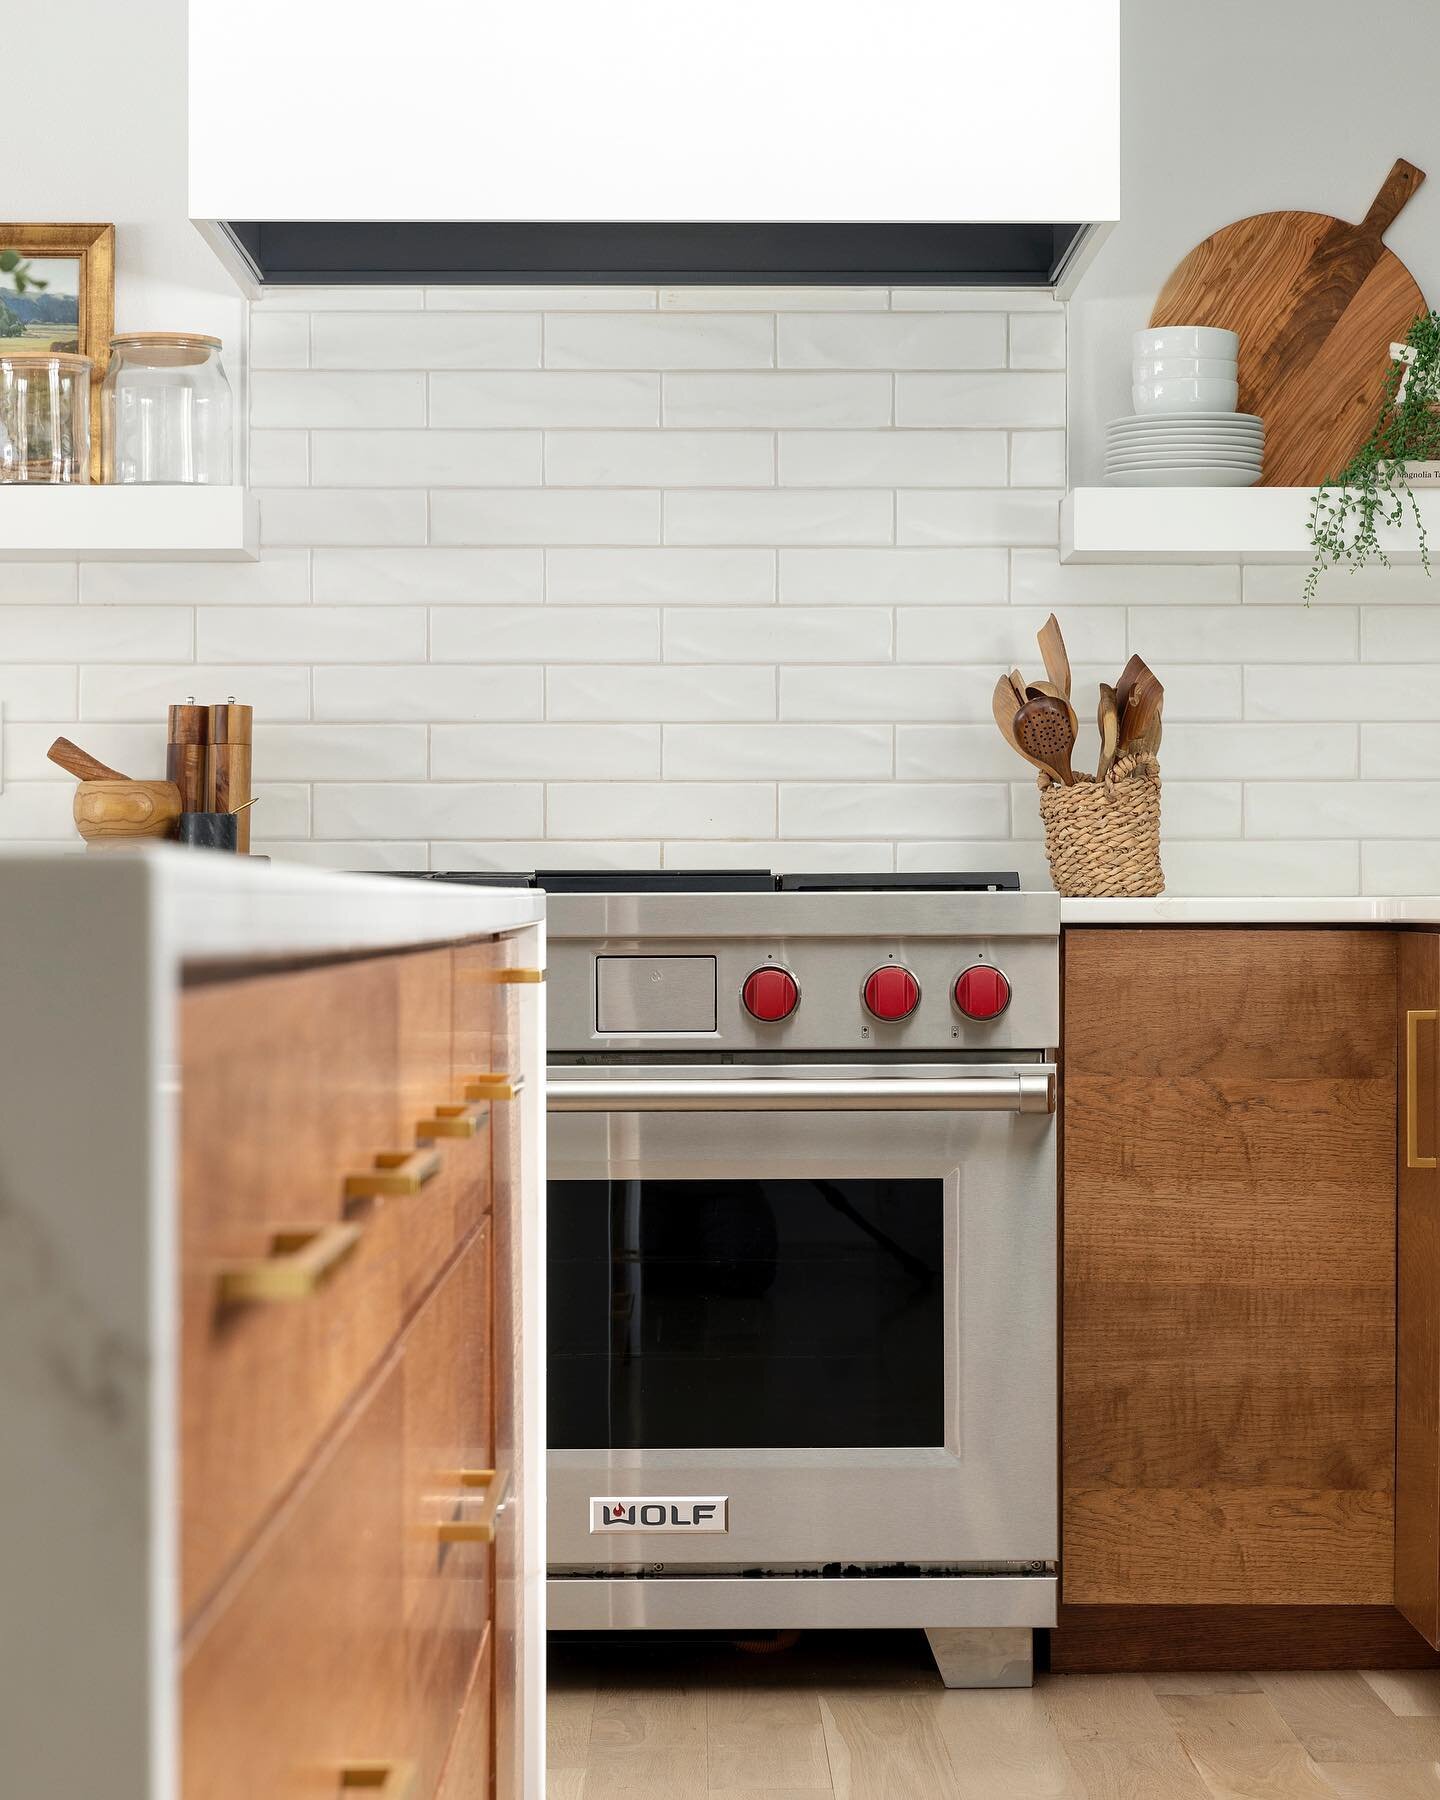 Loving the clean look of this kitchen renovation. The waterfall edge complements the horizontal grain on the cabinet drawer fronts.  Photo credit:@Spacecrafting_photography.  Cabinetry:@thorcraftcustomkitchens.  #christyleehome #eauclaire #kitchenins